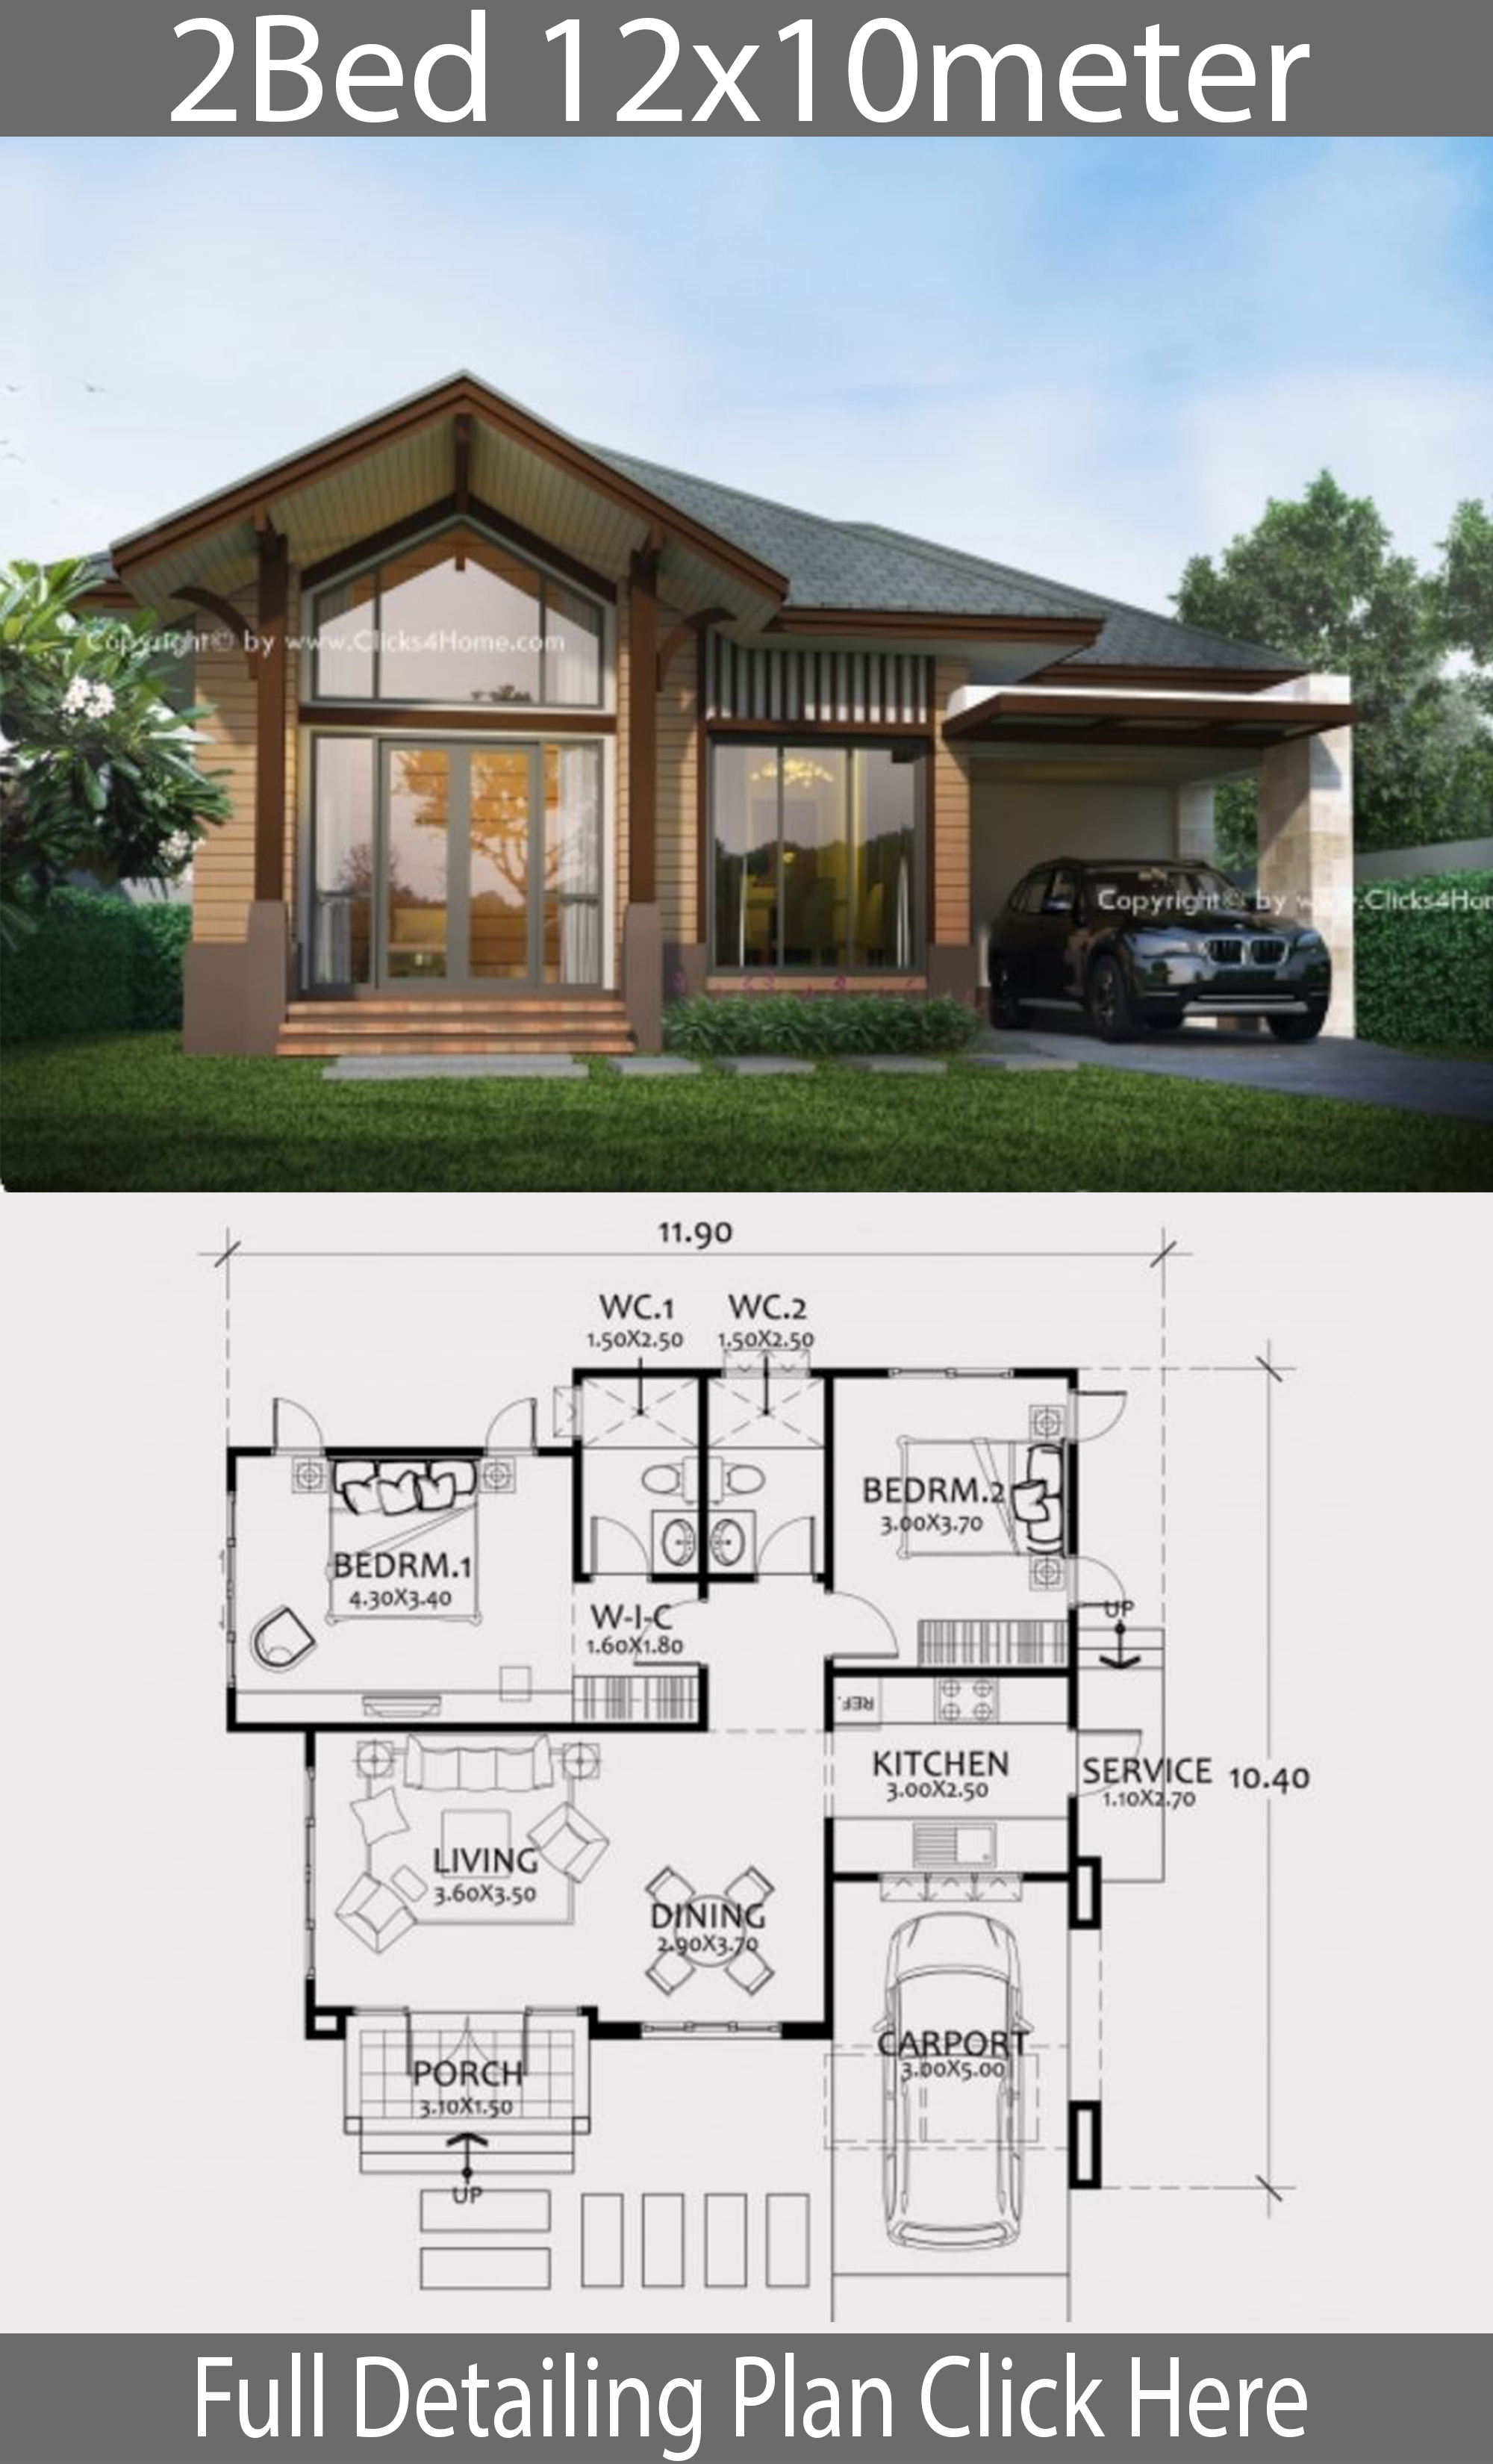 Home Design Plan 13x16m With 3 Bedrooms - Home Design With Plansearch #